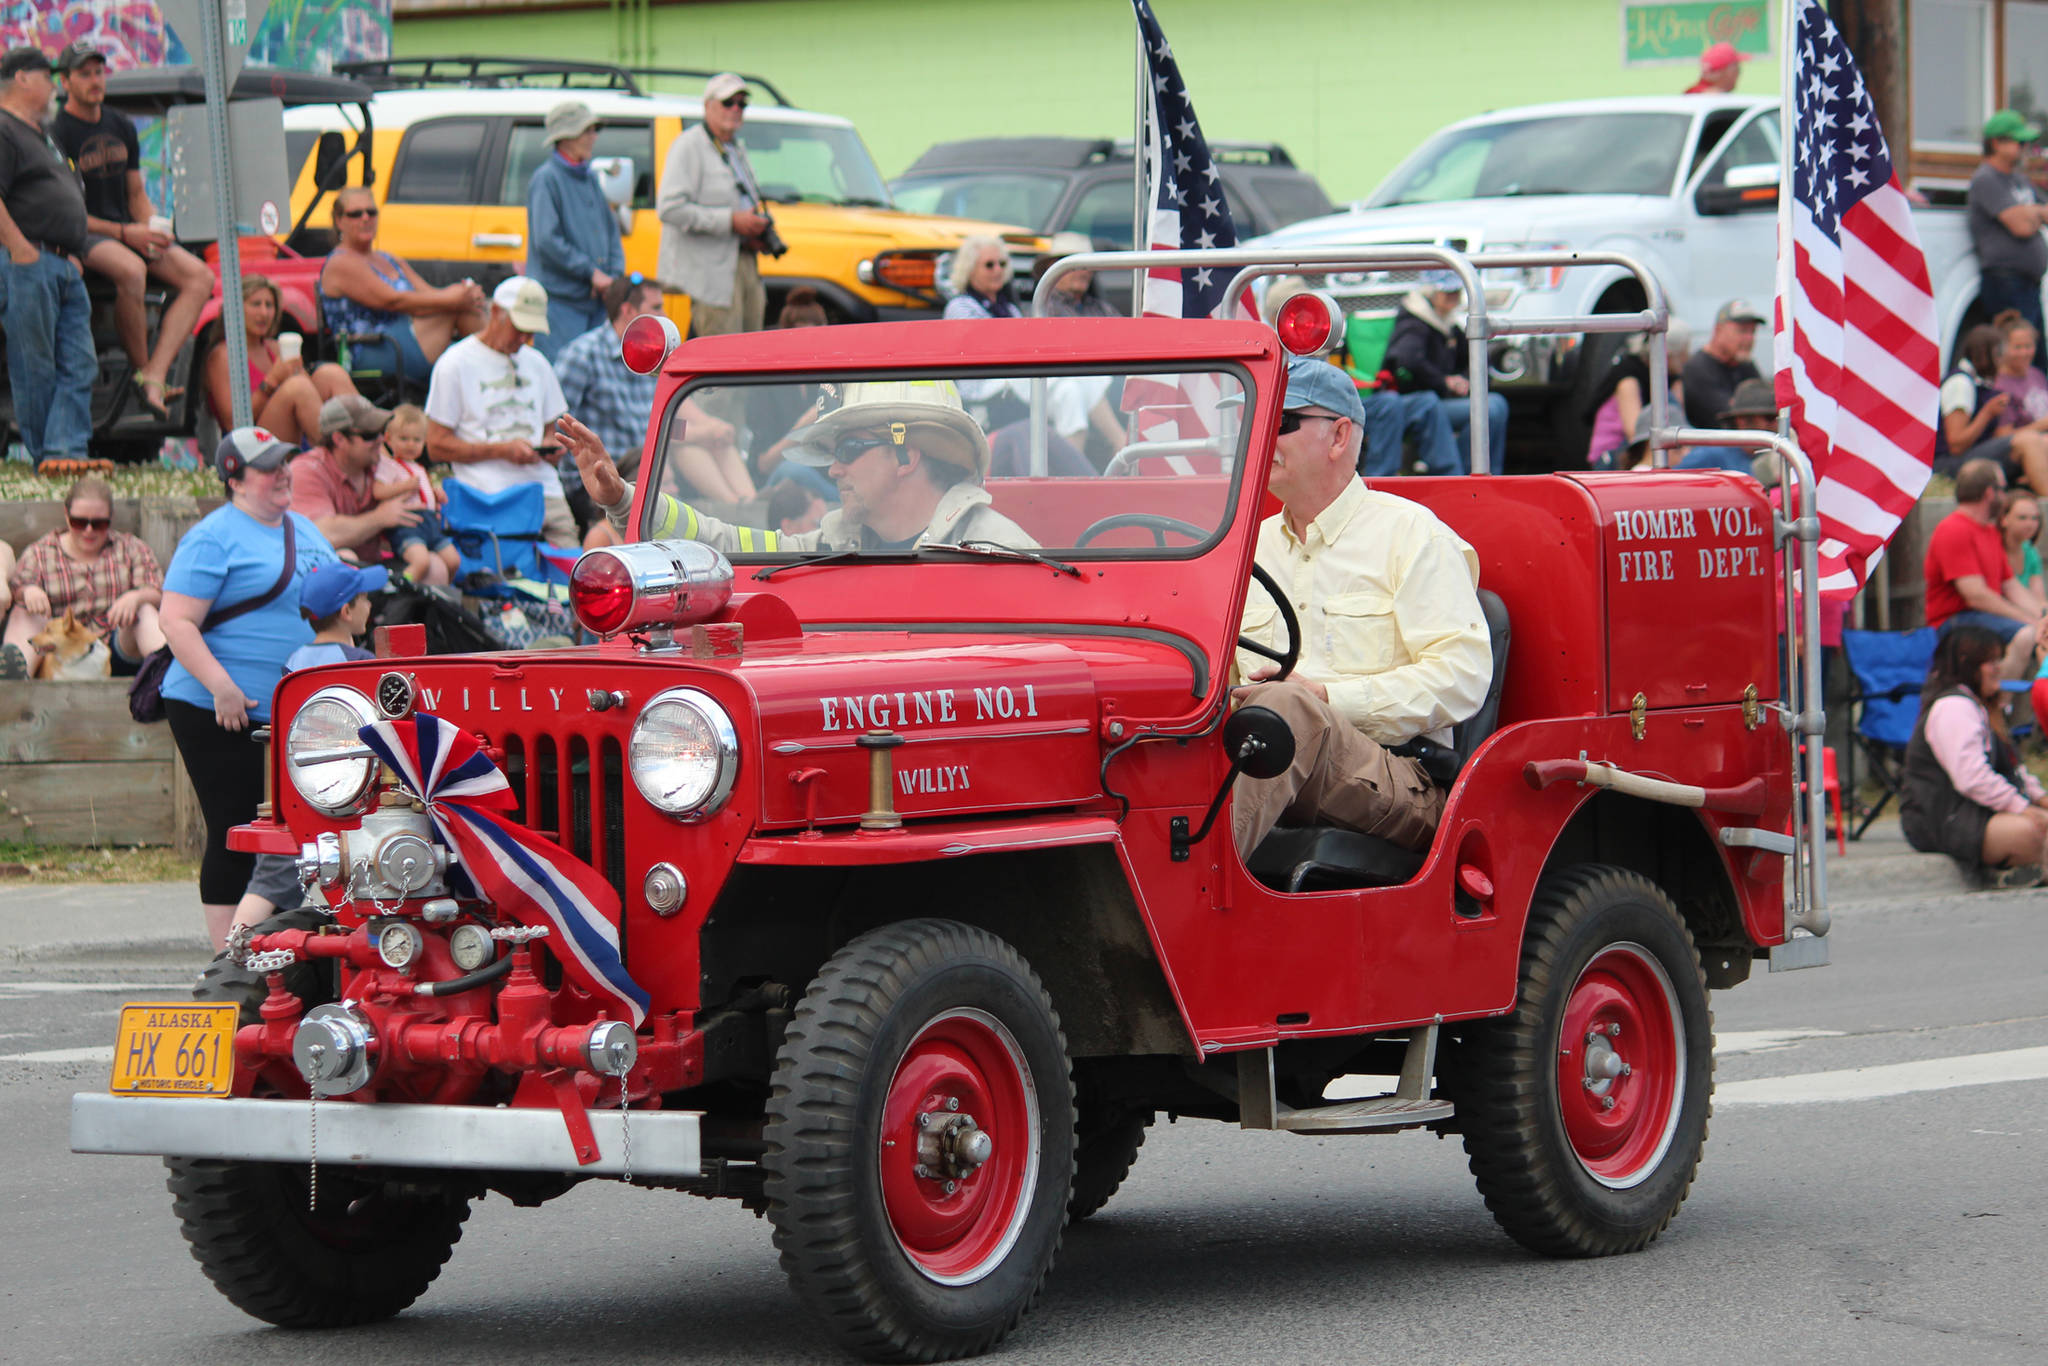 A historic fire engine makes its way along Pioneer Avenue during this year’s July Fourth parade on Thursday, July 4, 2019 in Homer, Alaska. (Photo by Megan Pacer/Homer News)